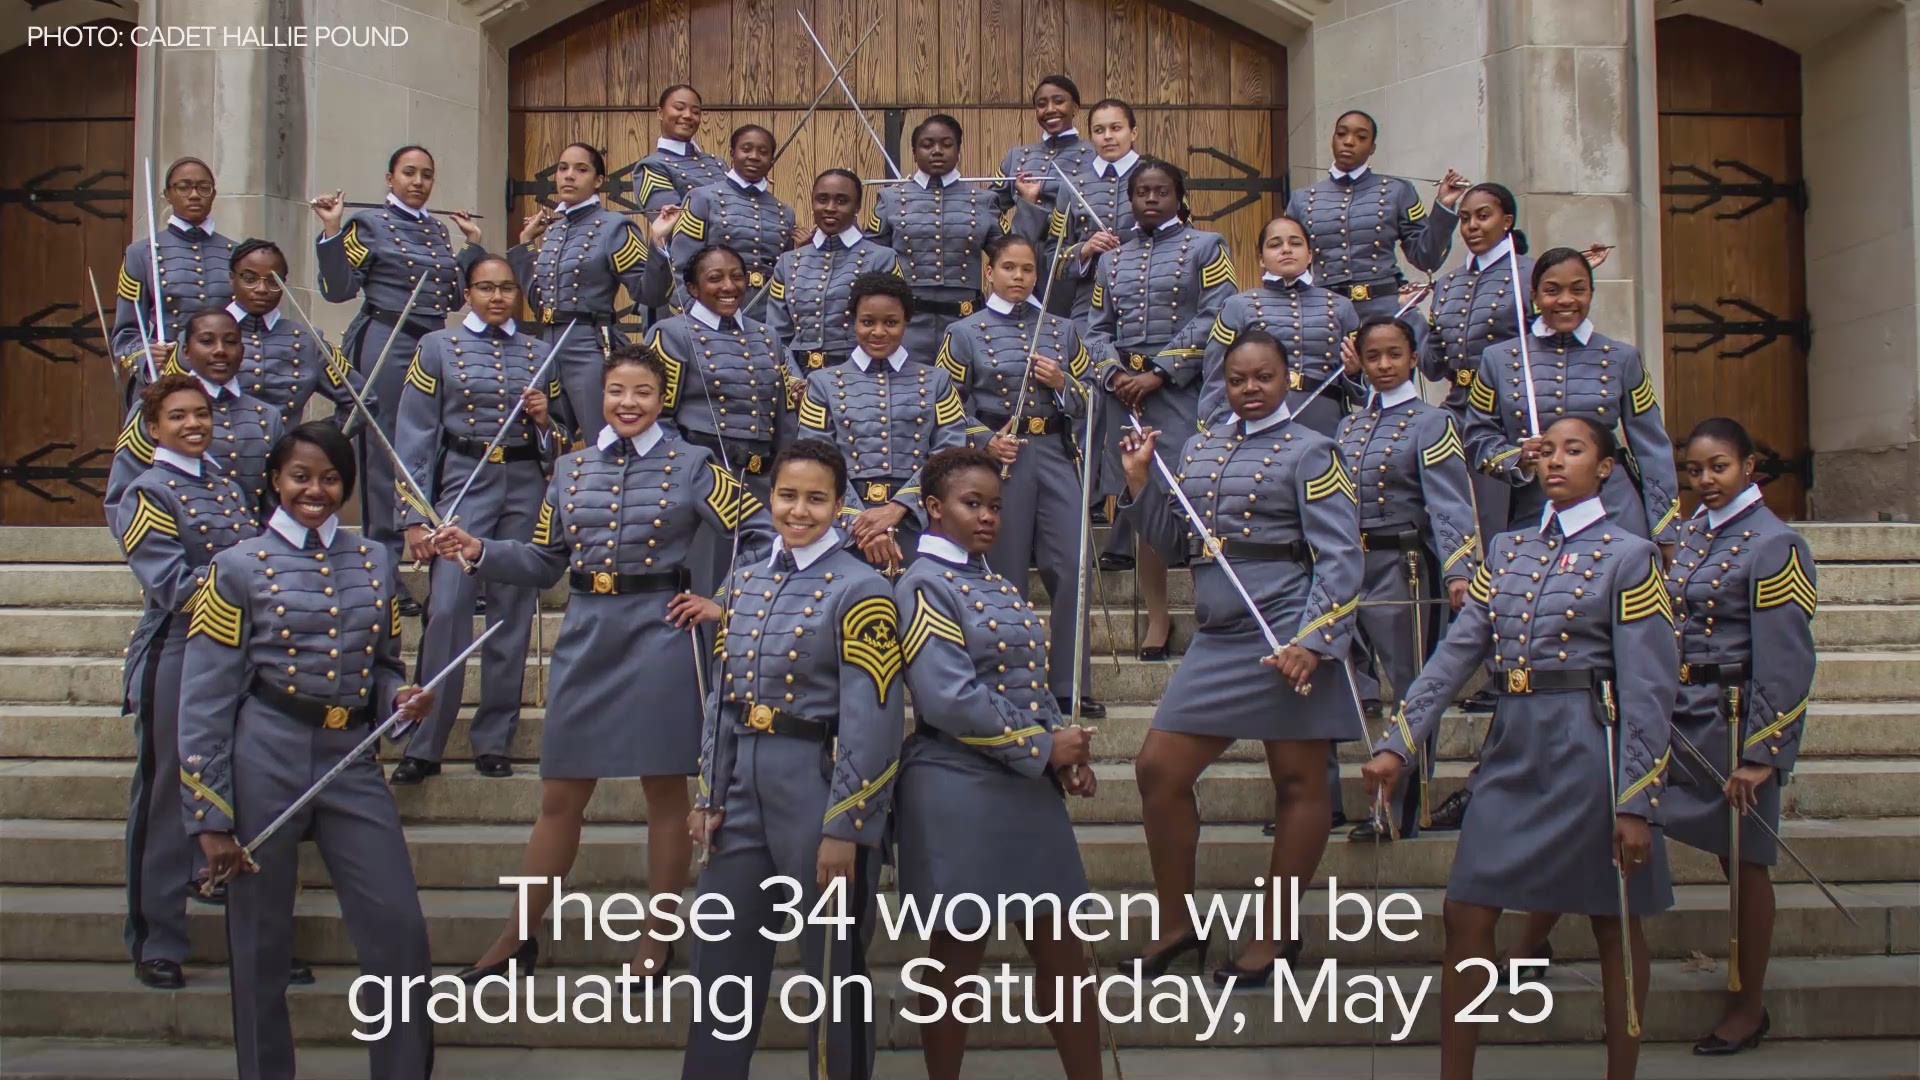 West Point spokesman Frank Demaro confirmed that 34 women will grace the stage later this month.